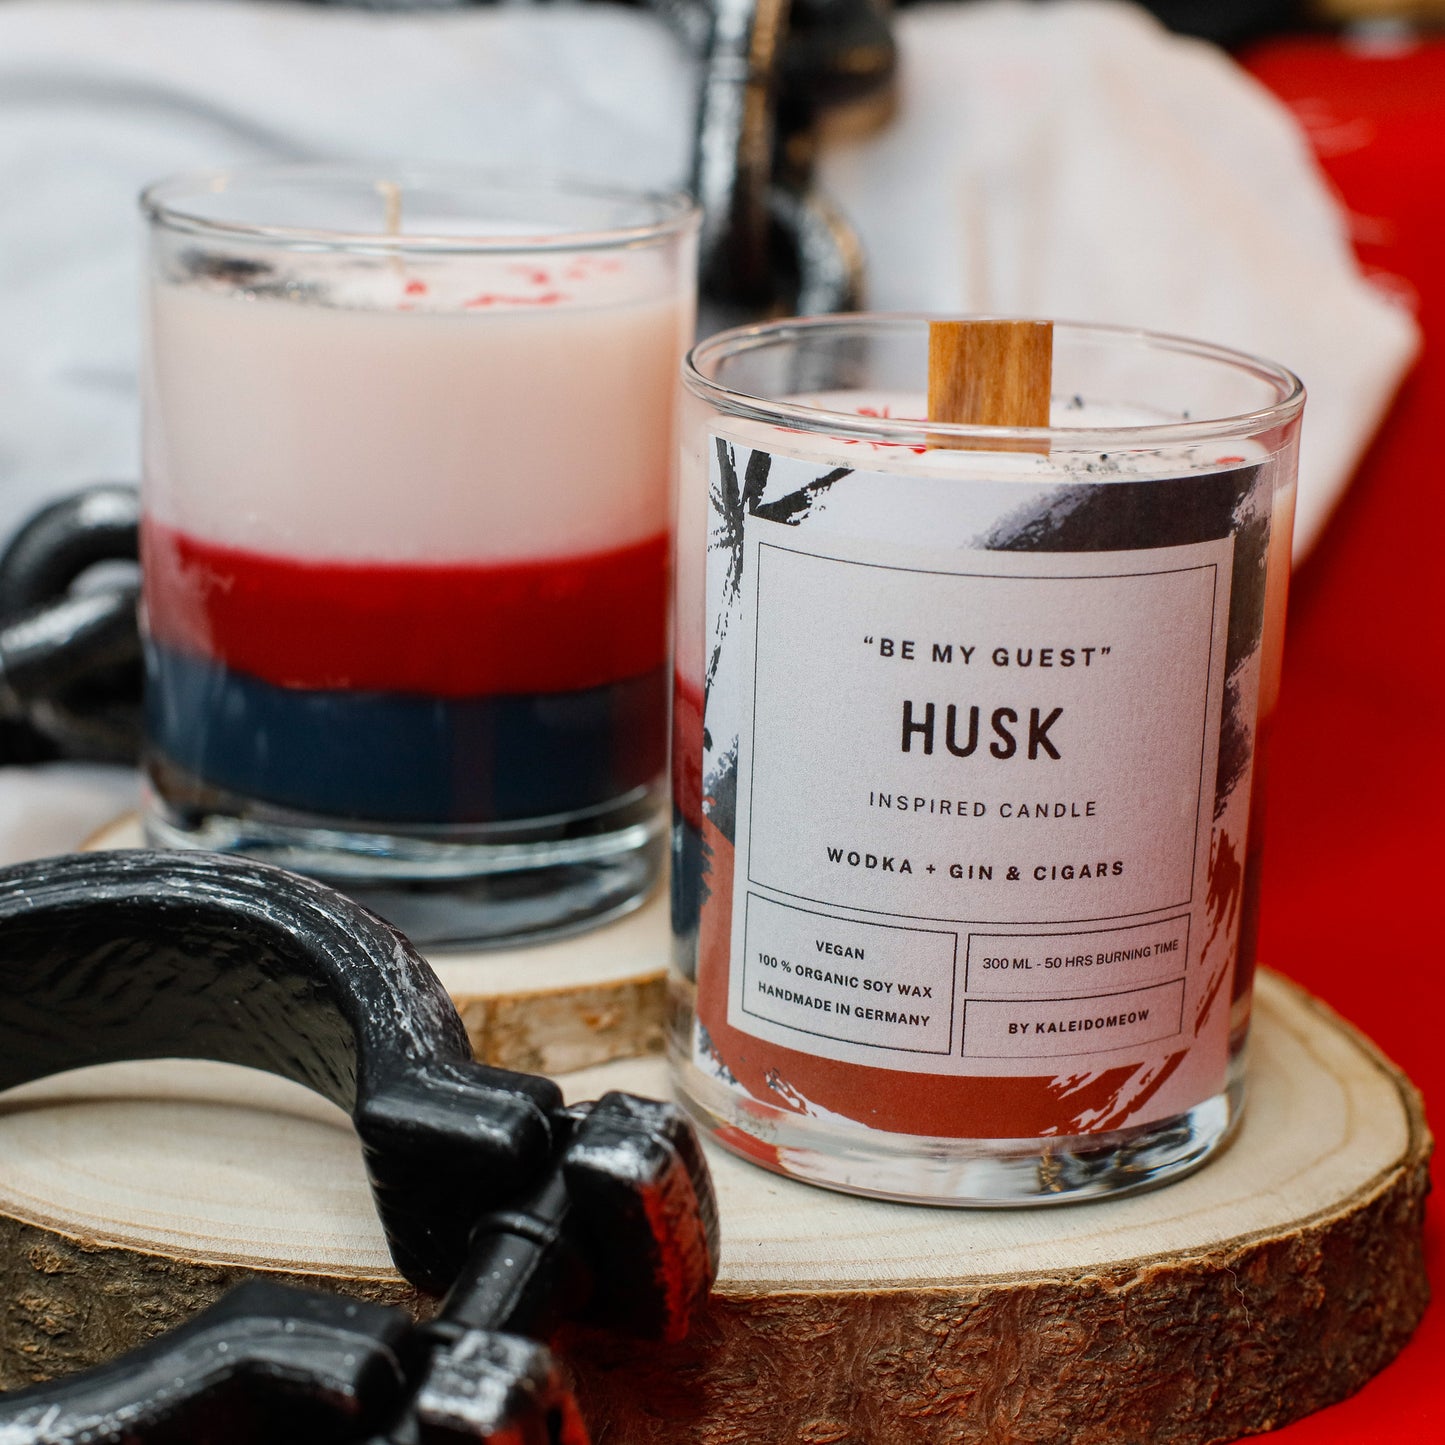 HUSK inspired candle - 'Be My Guest'' Hazbin Hotel inspired soy candle 300 ML